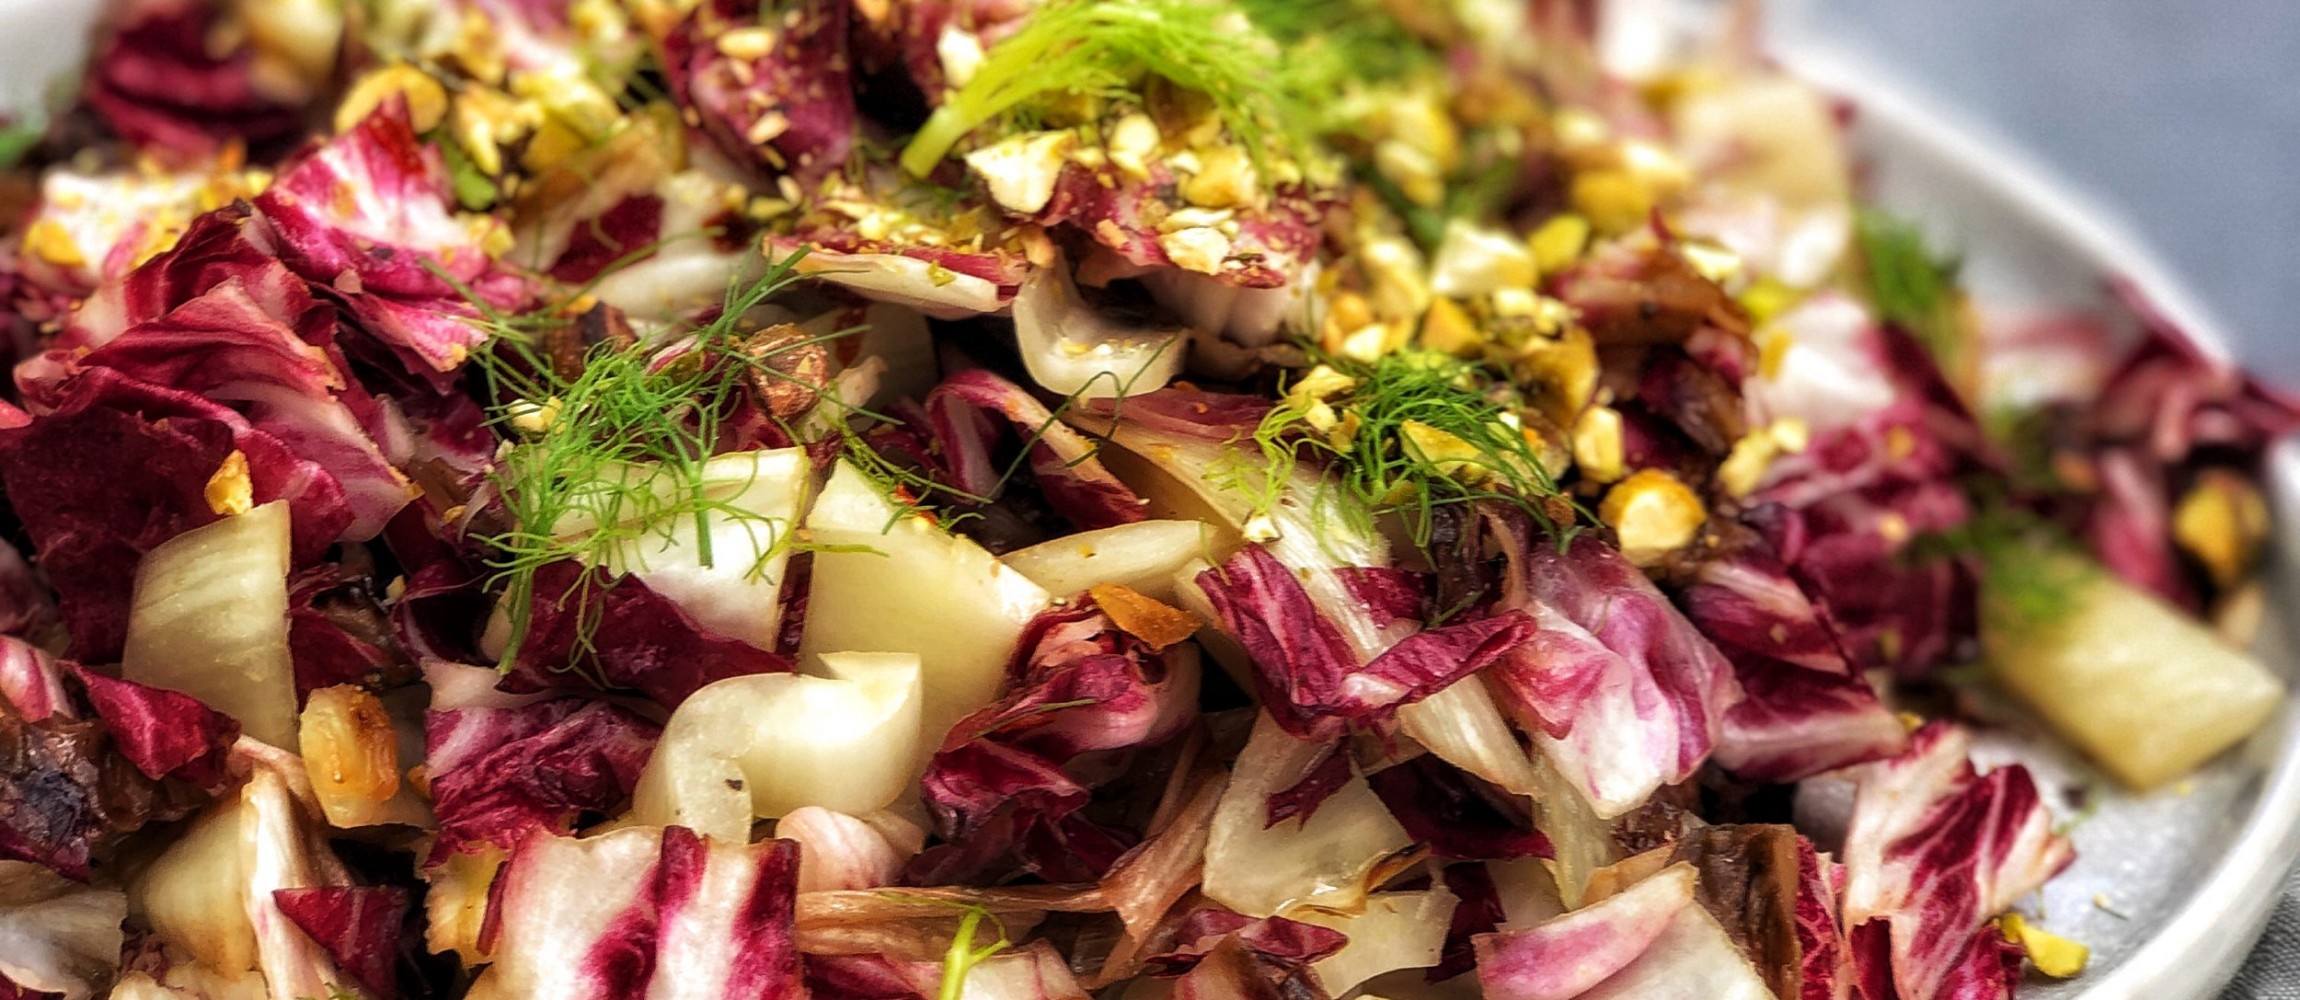 Grilled Radicchio and Fennel Salad | Recipes - Roger Mooking